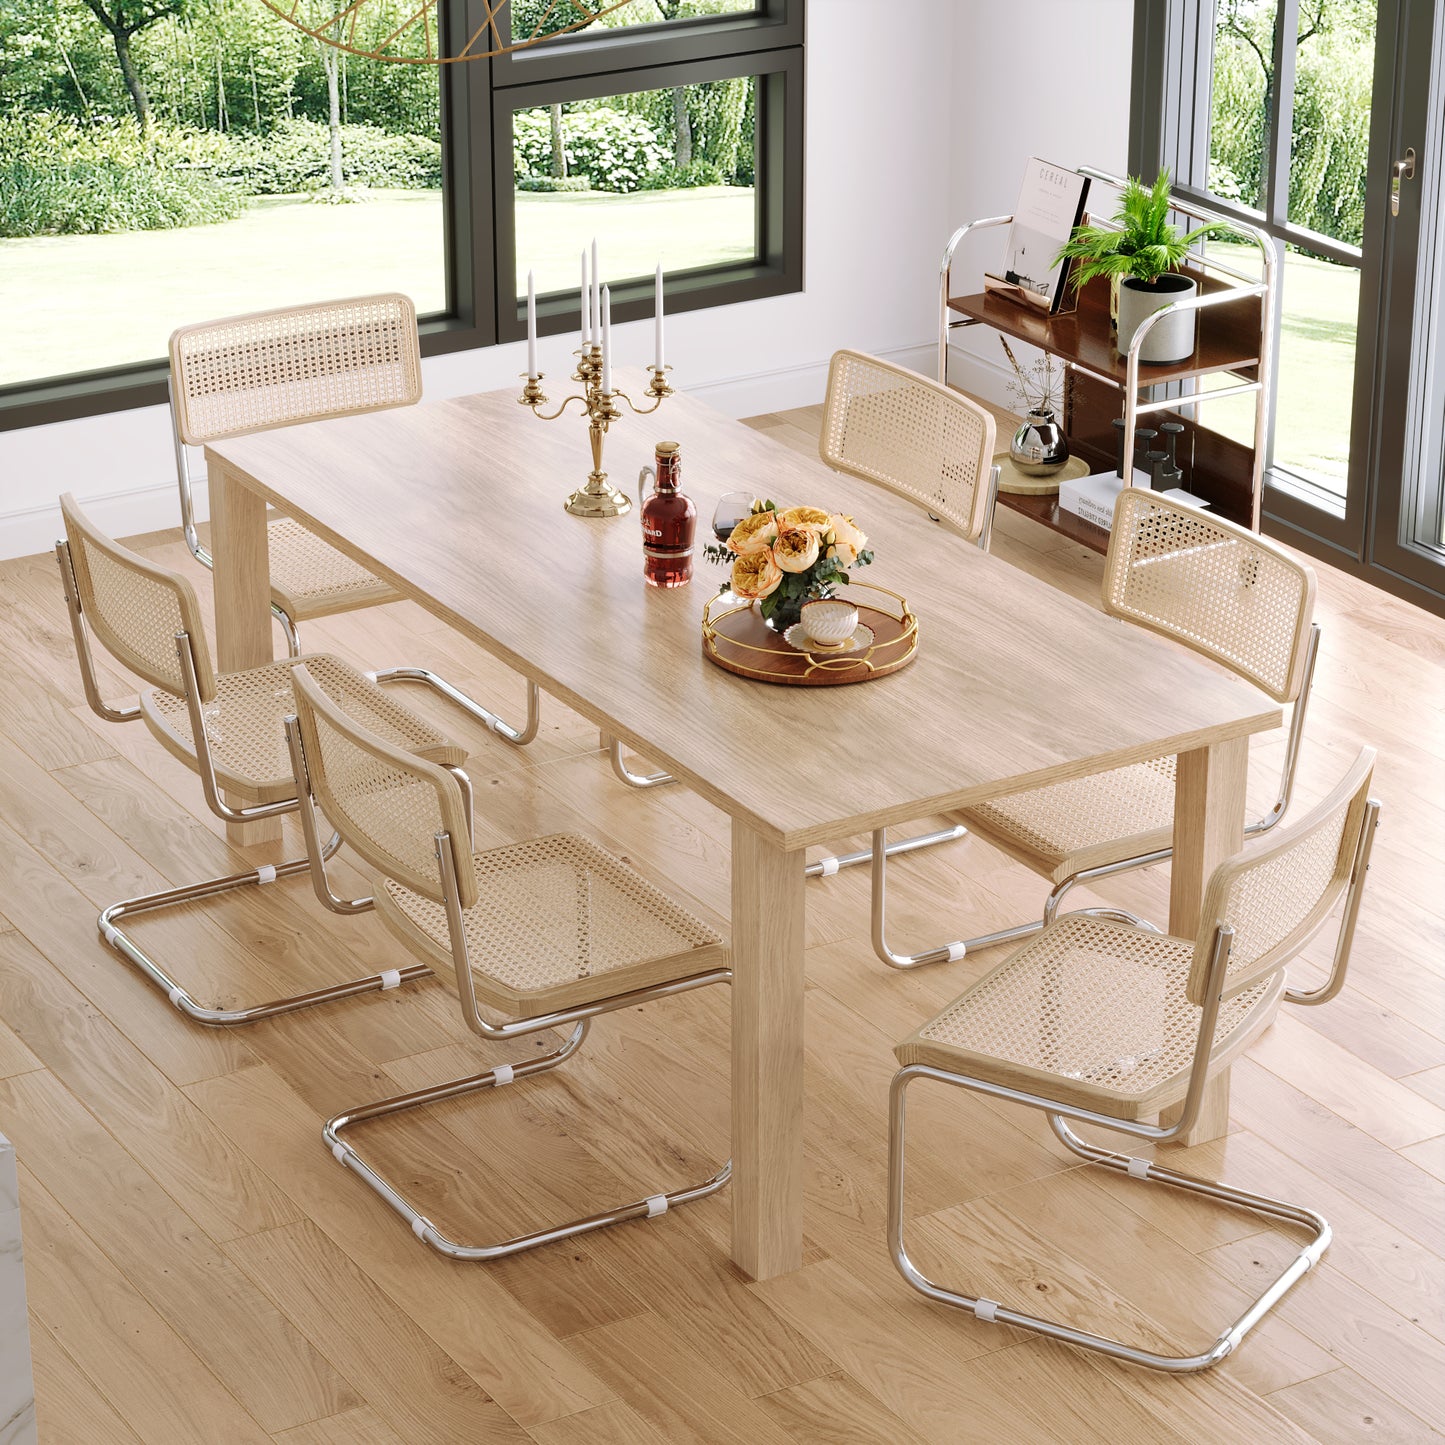 JASIWAY Kitchen Dining 2 Chairs